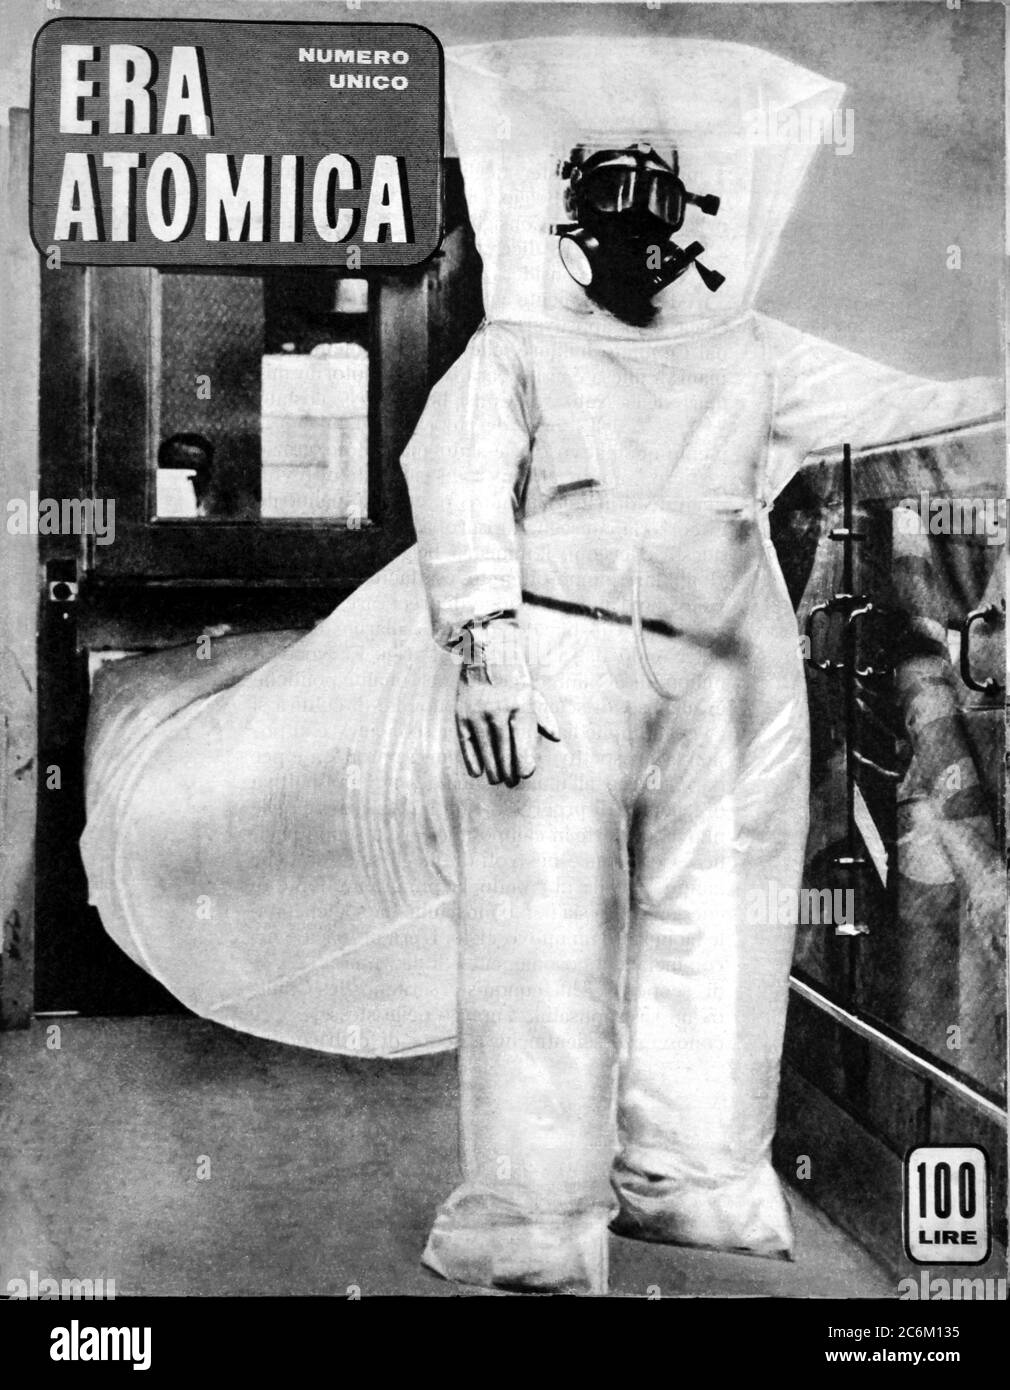 1955 , ITALY : Cover of italian illustrated magazine ERA ATOMICA ( ATOMIC ERA ) on the modern ATOMIC AGE of COLD WAR, pubblished by italian communist magazine IL LAVORO ( of CGIL syndacate: Confederazione Generale Italiana del Lavoro ) for the Pacifism and the abandonment of any use of atomic energy for war. - PACE - PACIFISMO - ENERGIA ATOMICA - ENERGY - GUERRA FREDDA - ATTACCO ATOMICO NUCLEARE ENERGIA - ENERGY - NUCLEAR ATTACK -  BOMBA ATOMICA - foto storiche storica - HISTORY PHOTOS - bomb - GUERRA FREDDA - COLD WAR - ATOMO - ENERGIA NUCLEARE - nuclear weapon - fungo atomico - radioattività Stock Photo